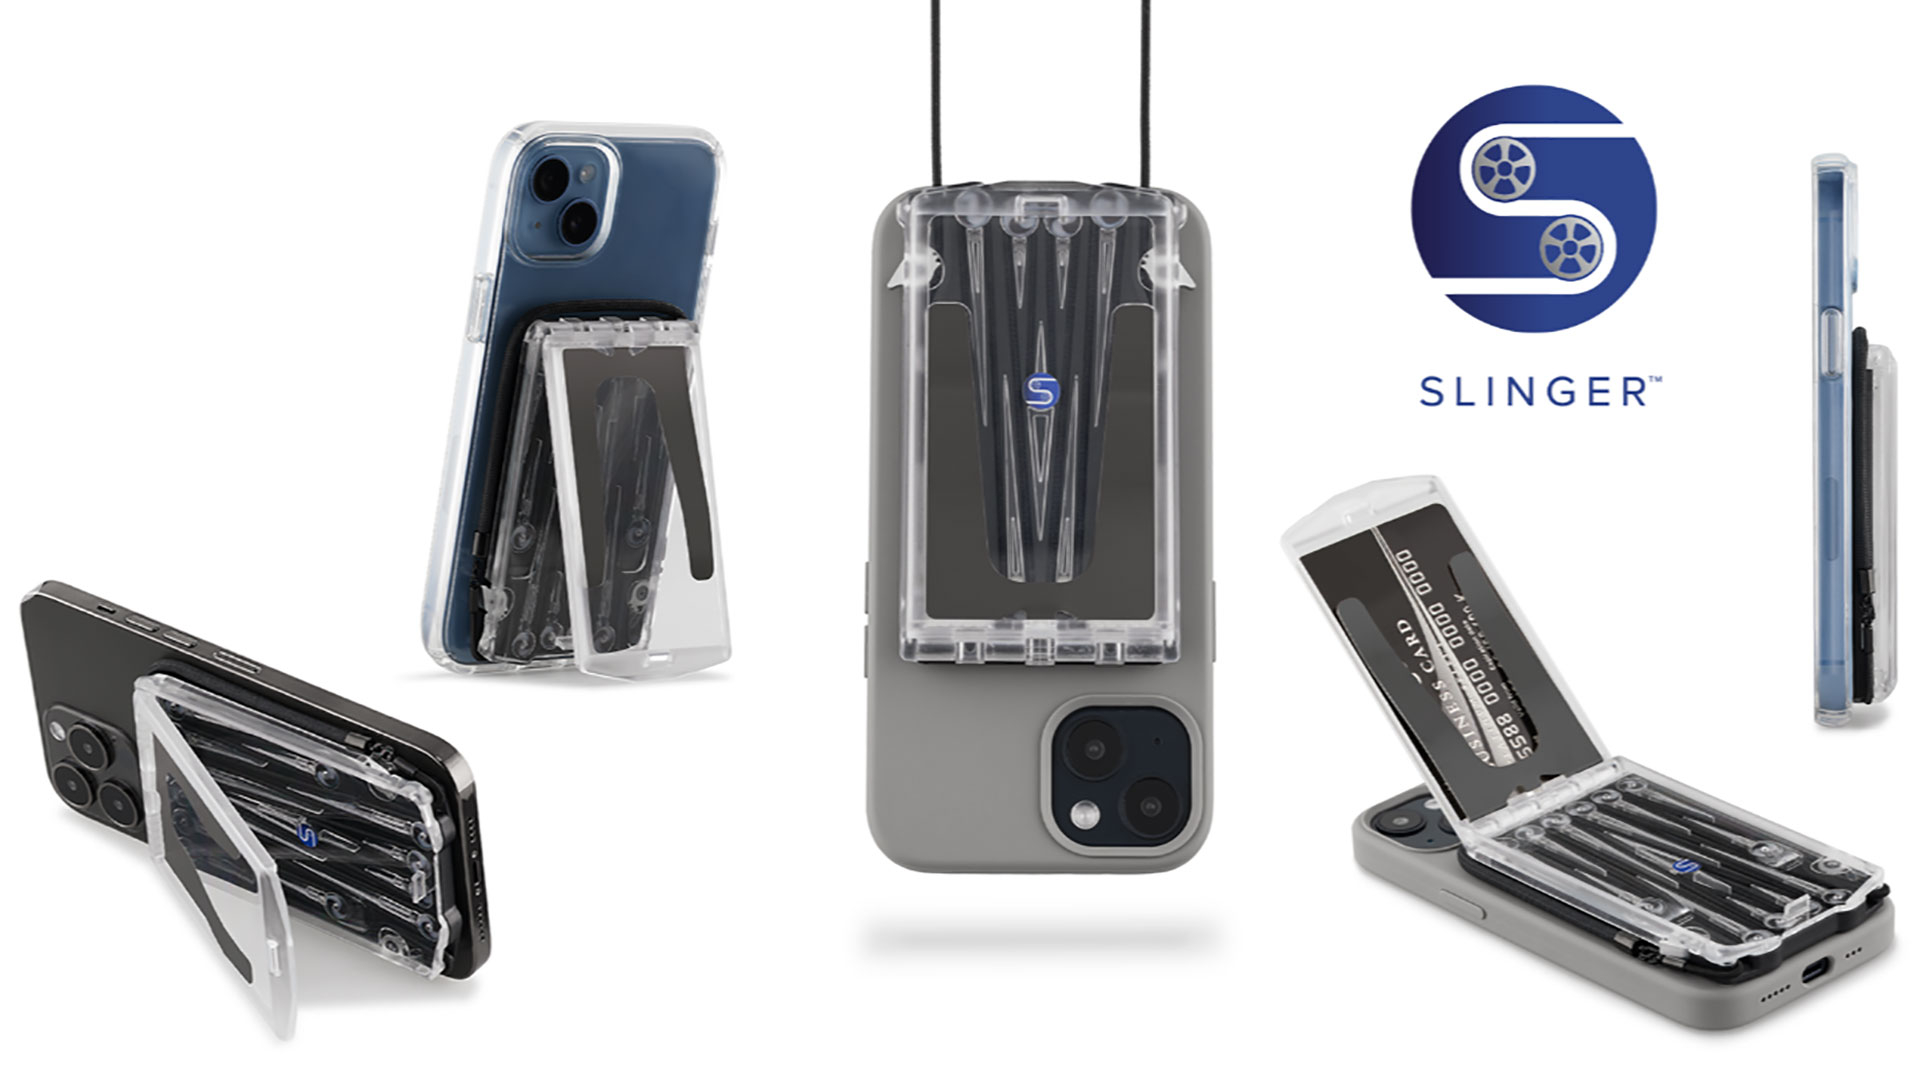 See Slinger in action! The world's only retractable smartphone lanyard, wallet, and kickstand.